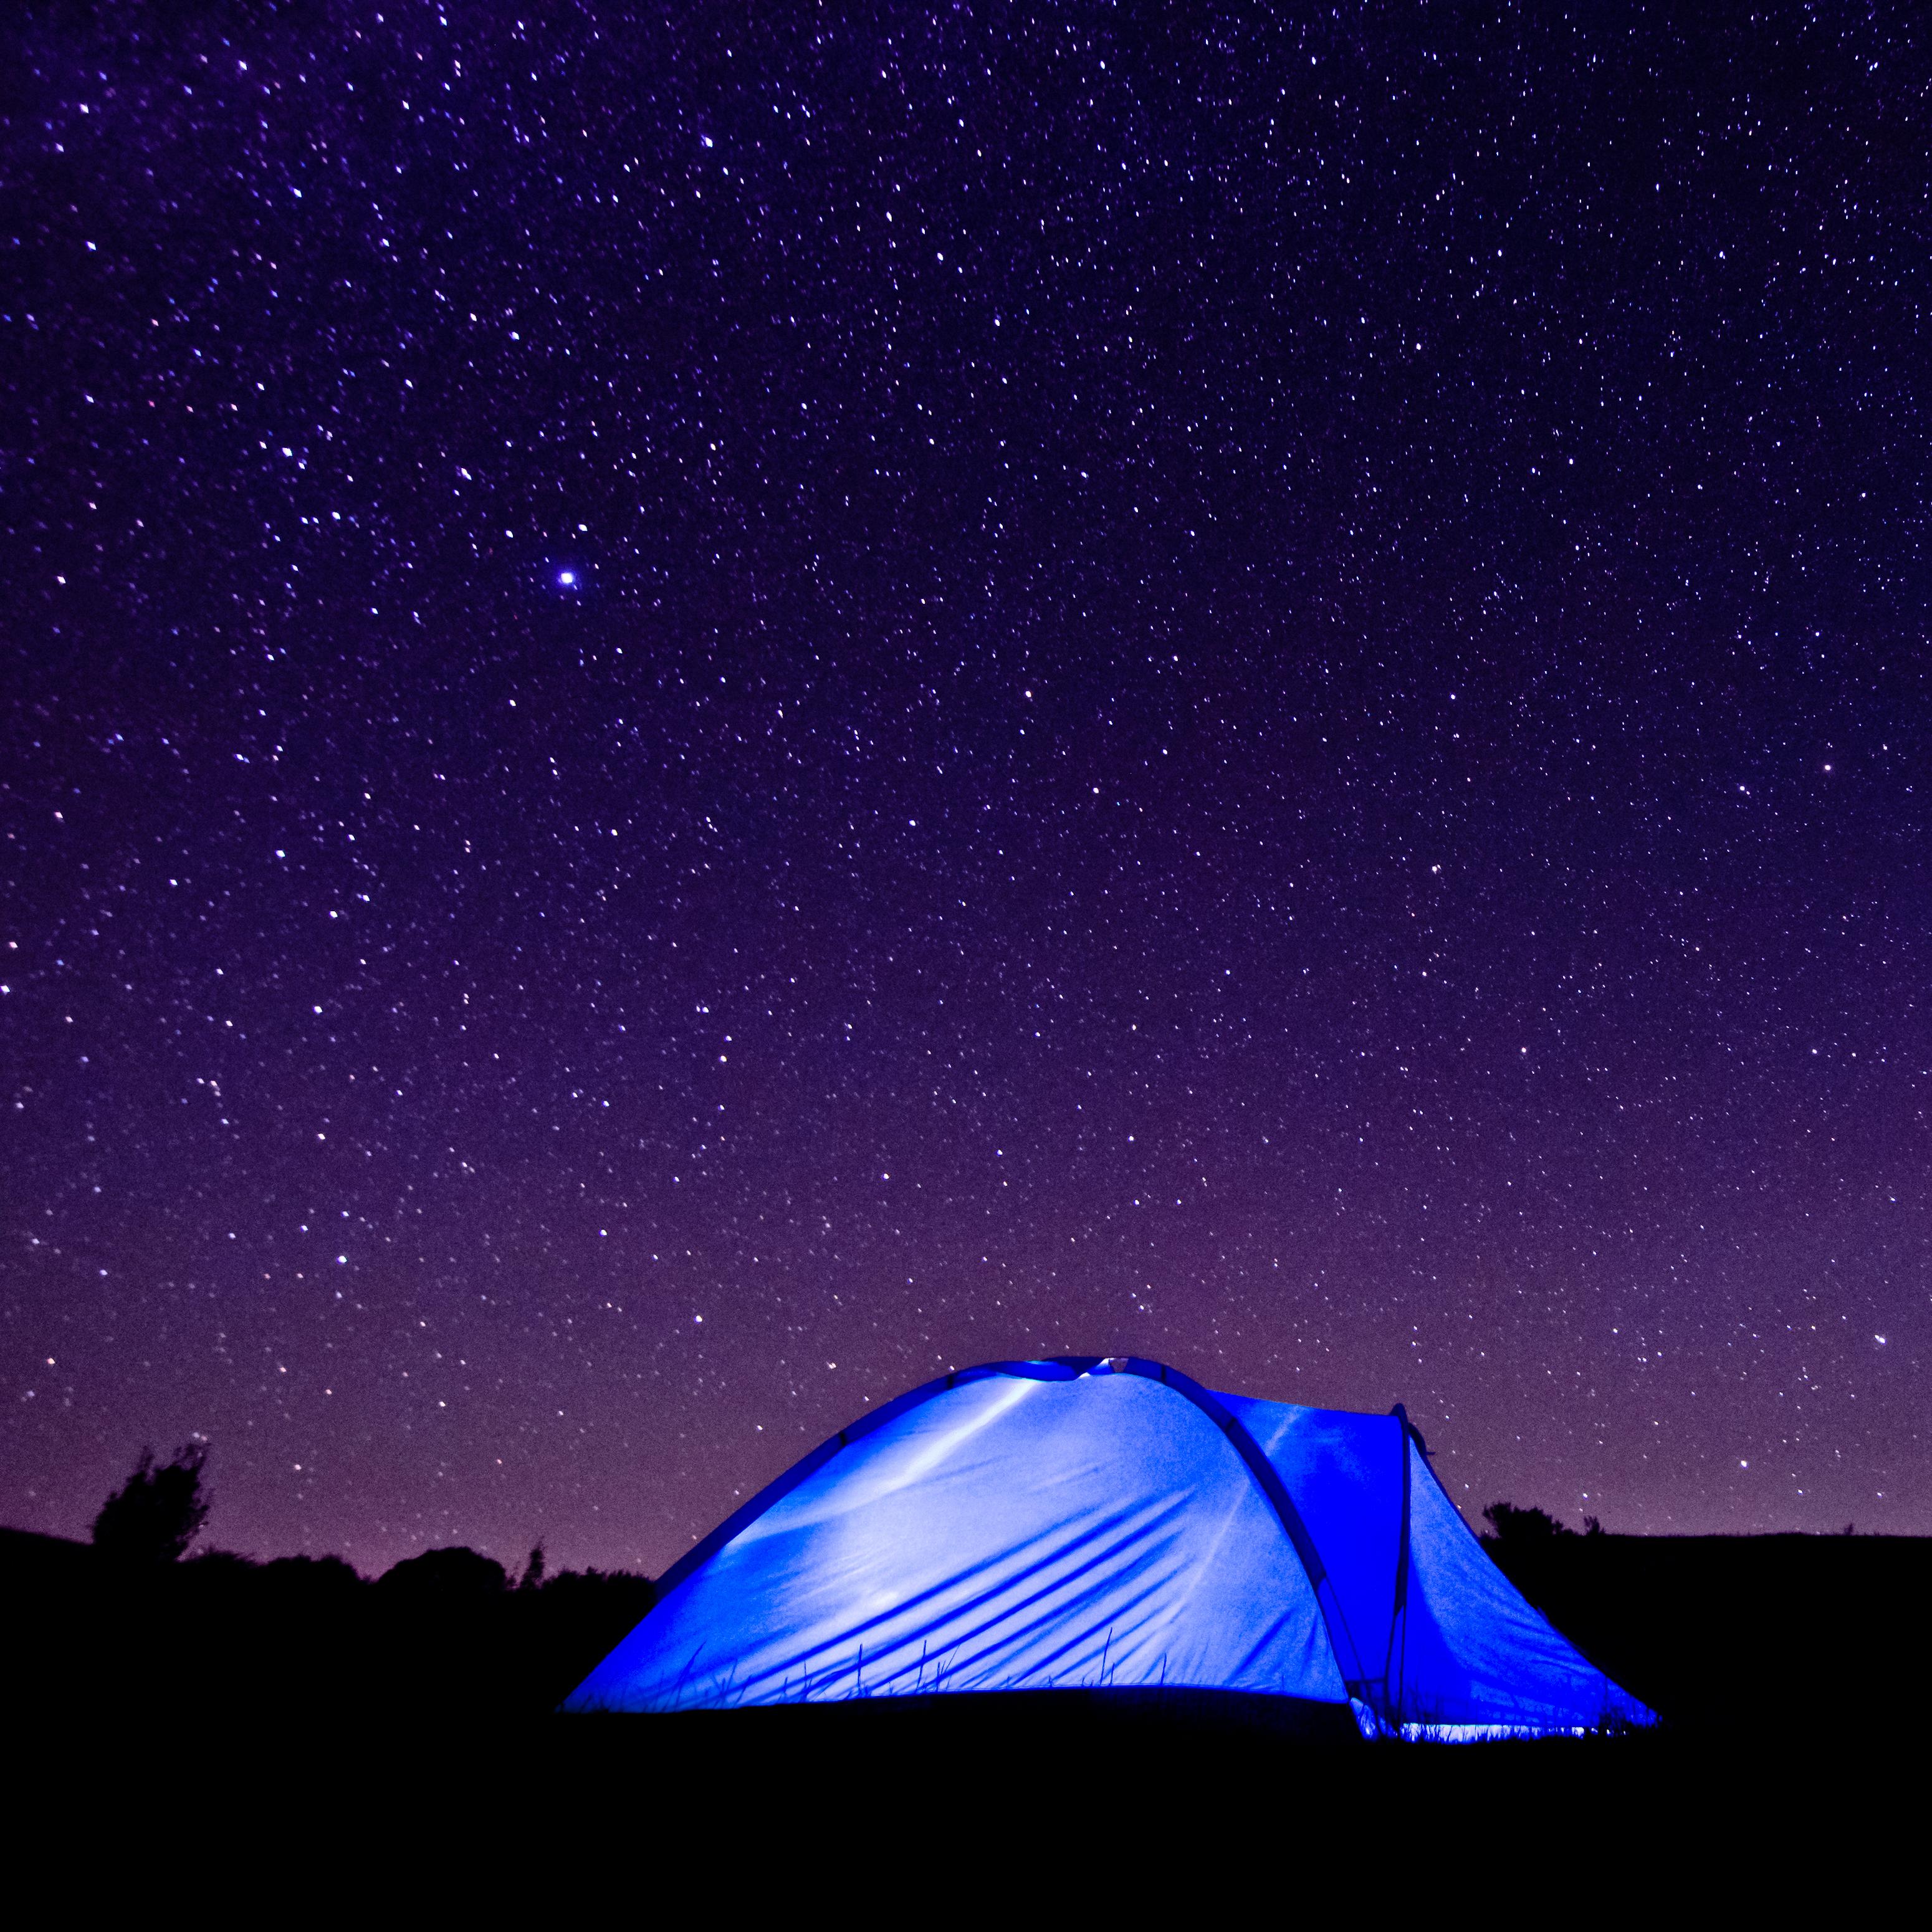 A tent is the perfect way to experience the wonders of the night sky © Q-lieb-in / Shutterstock